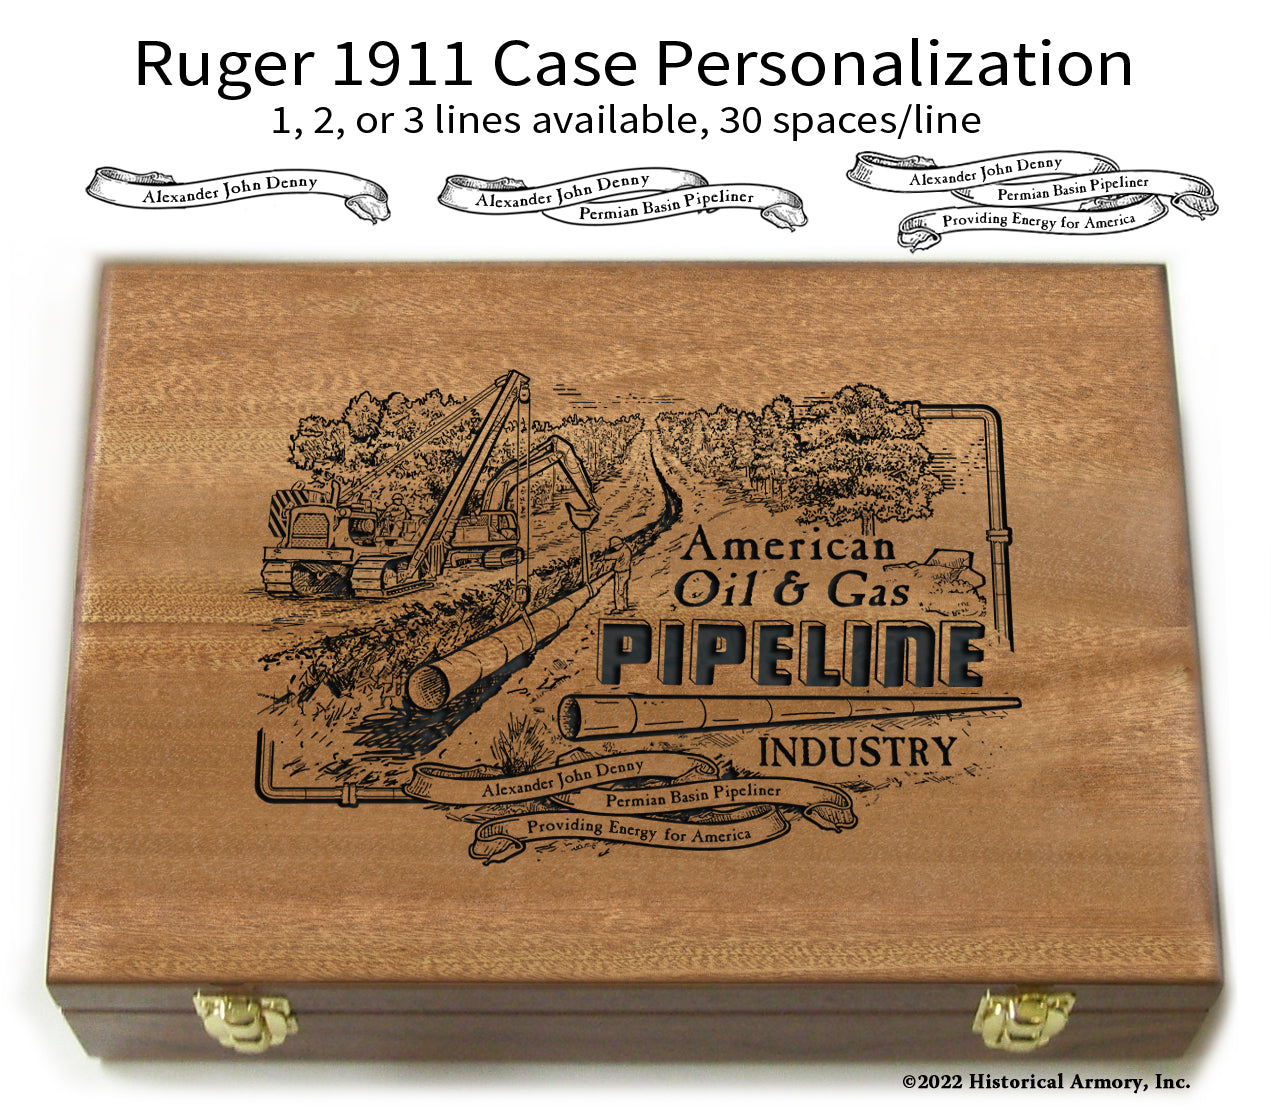 American Oil & Gas Engraved Ruger .45 Colt 1911 Personalized Presentation Case